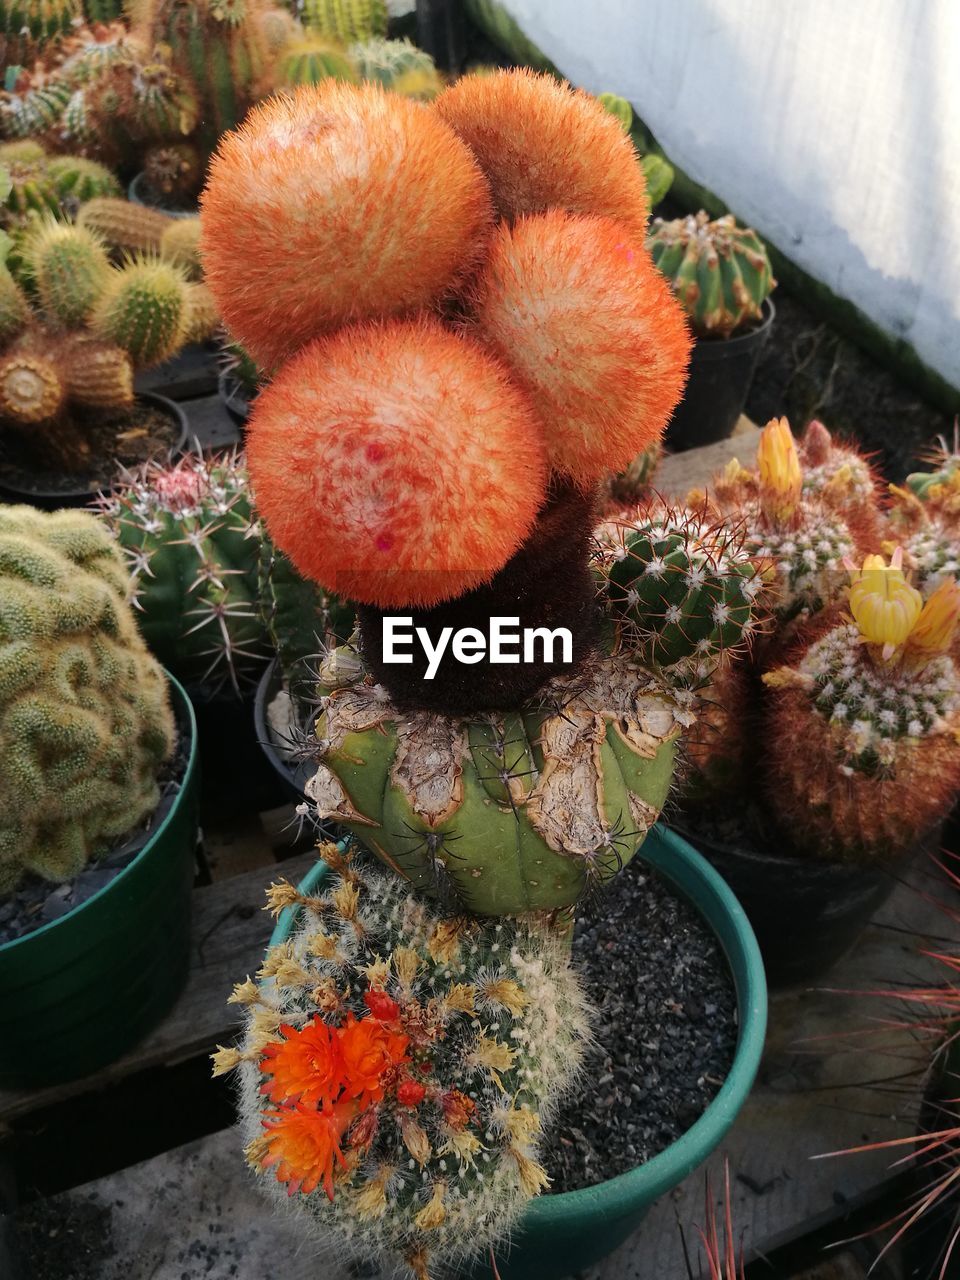 HIGH ANGLE VIEW OF FRUITS AND CACTUS GROWING ON PLANT